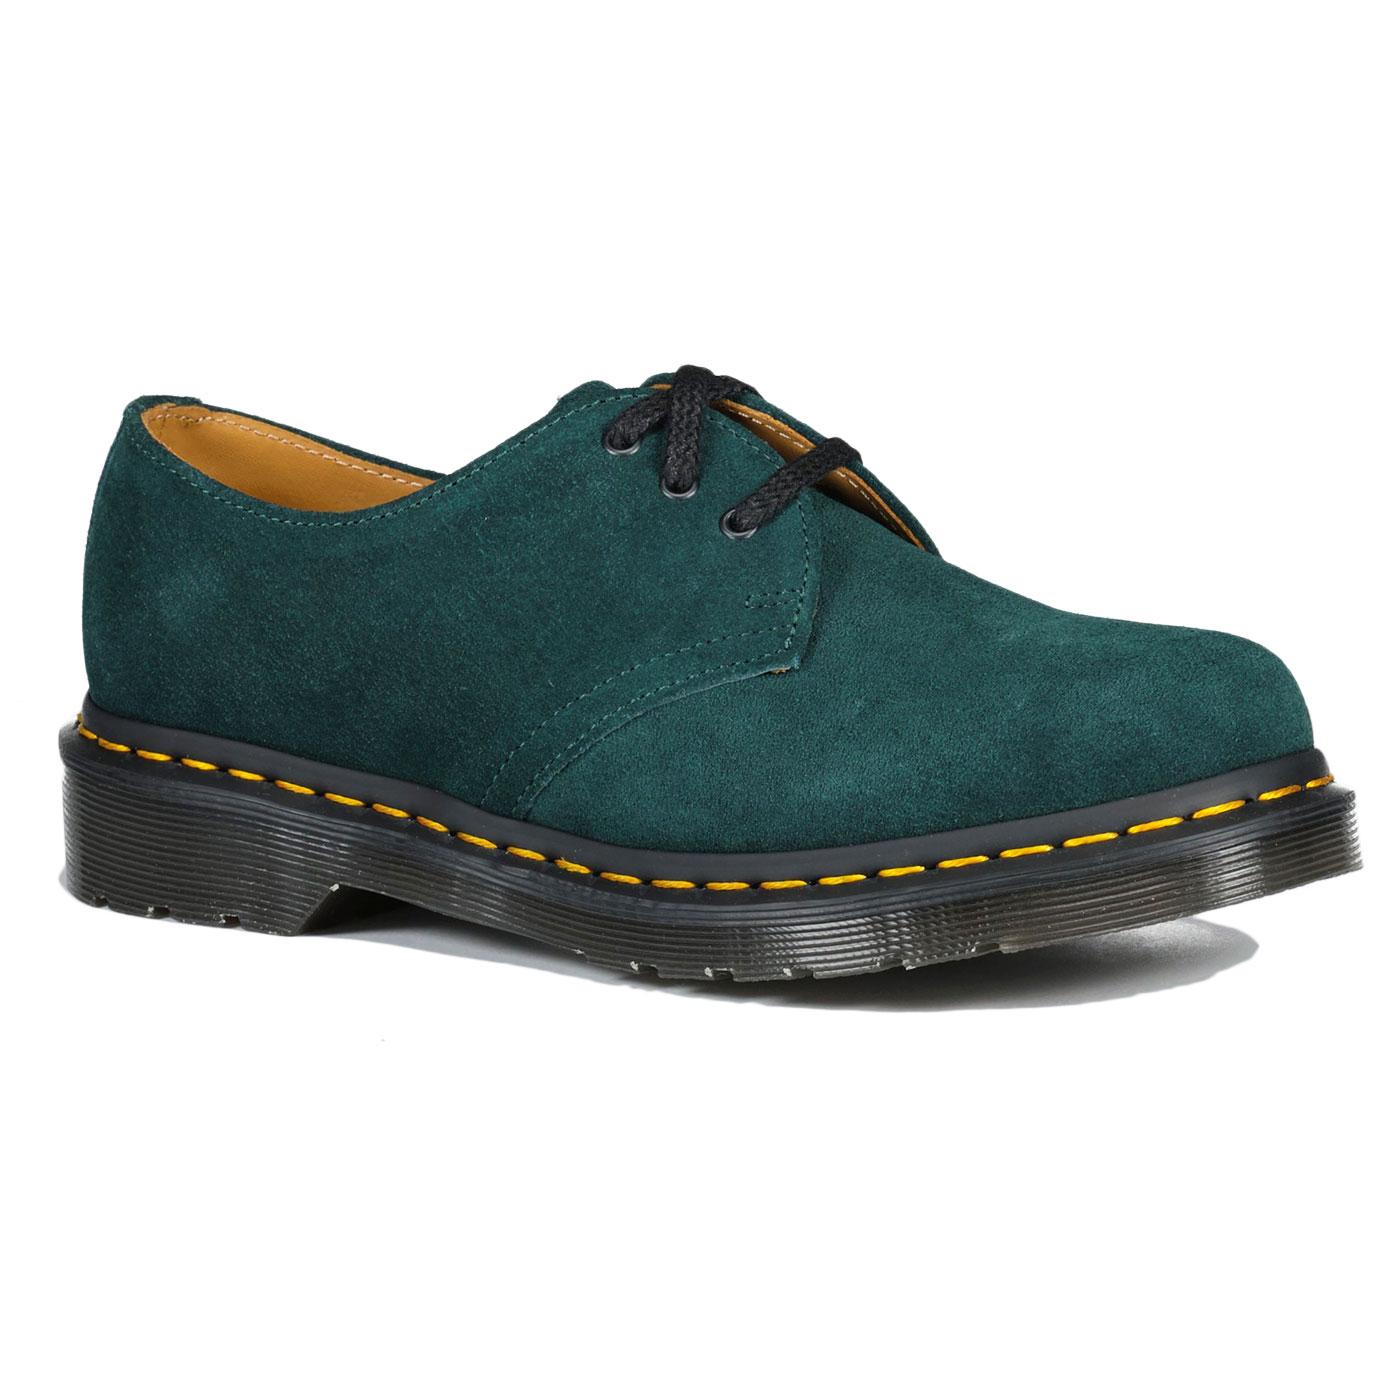 DR MARTENS 1461 Retro Mod EH Suede 3 Eye Shoes in Green